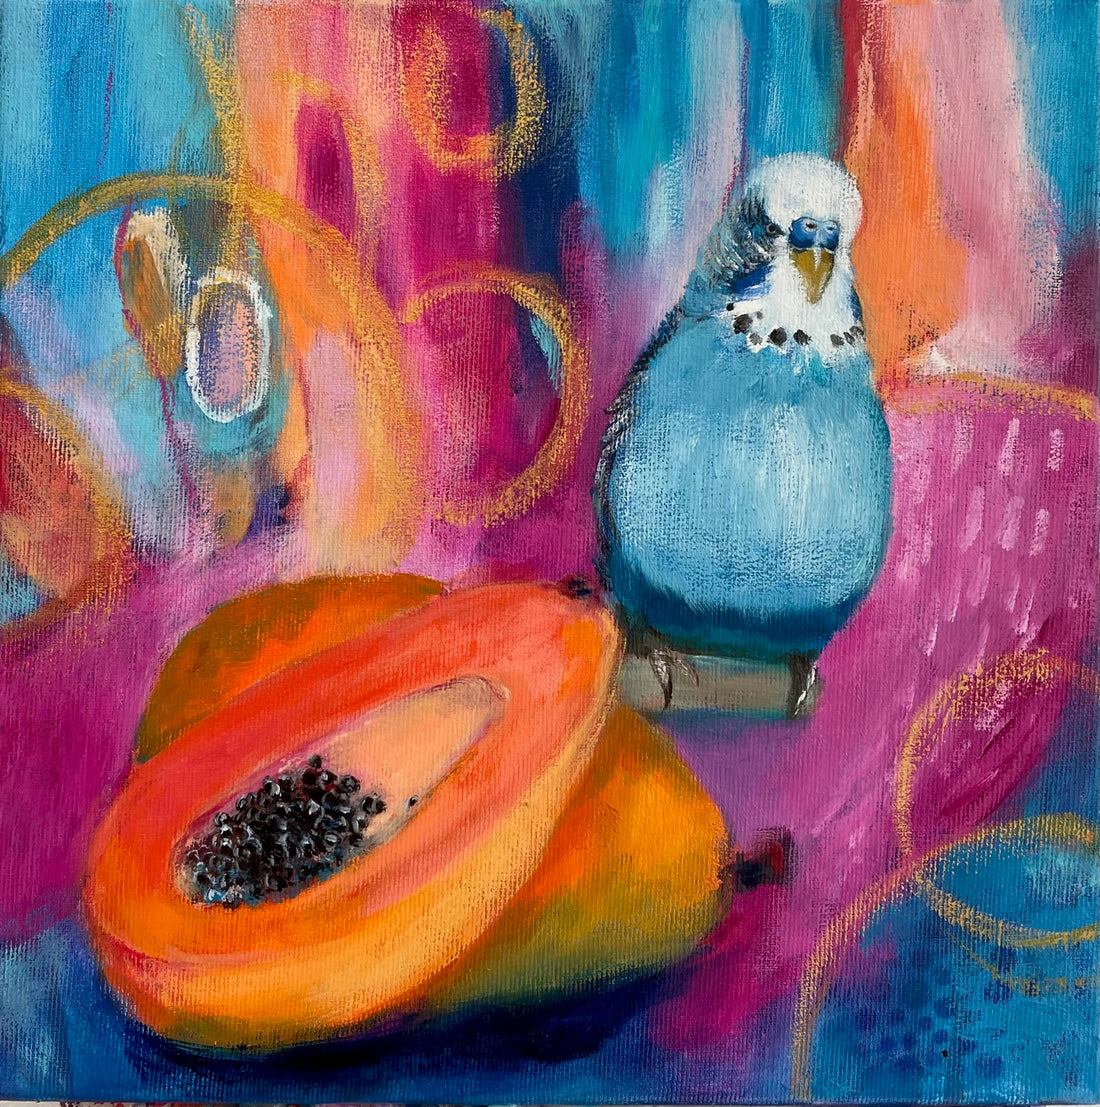 Colourful mixed media painting of blue budgie with papaya on colourful abstract background